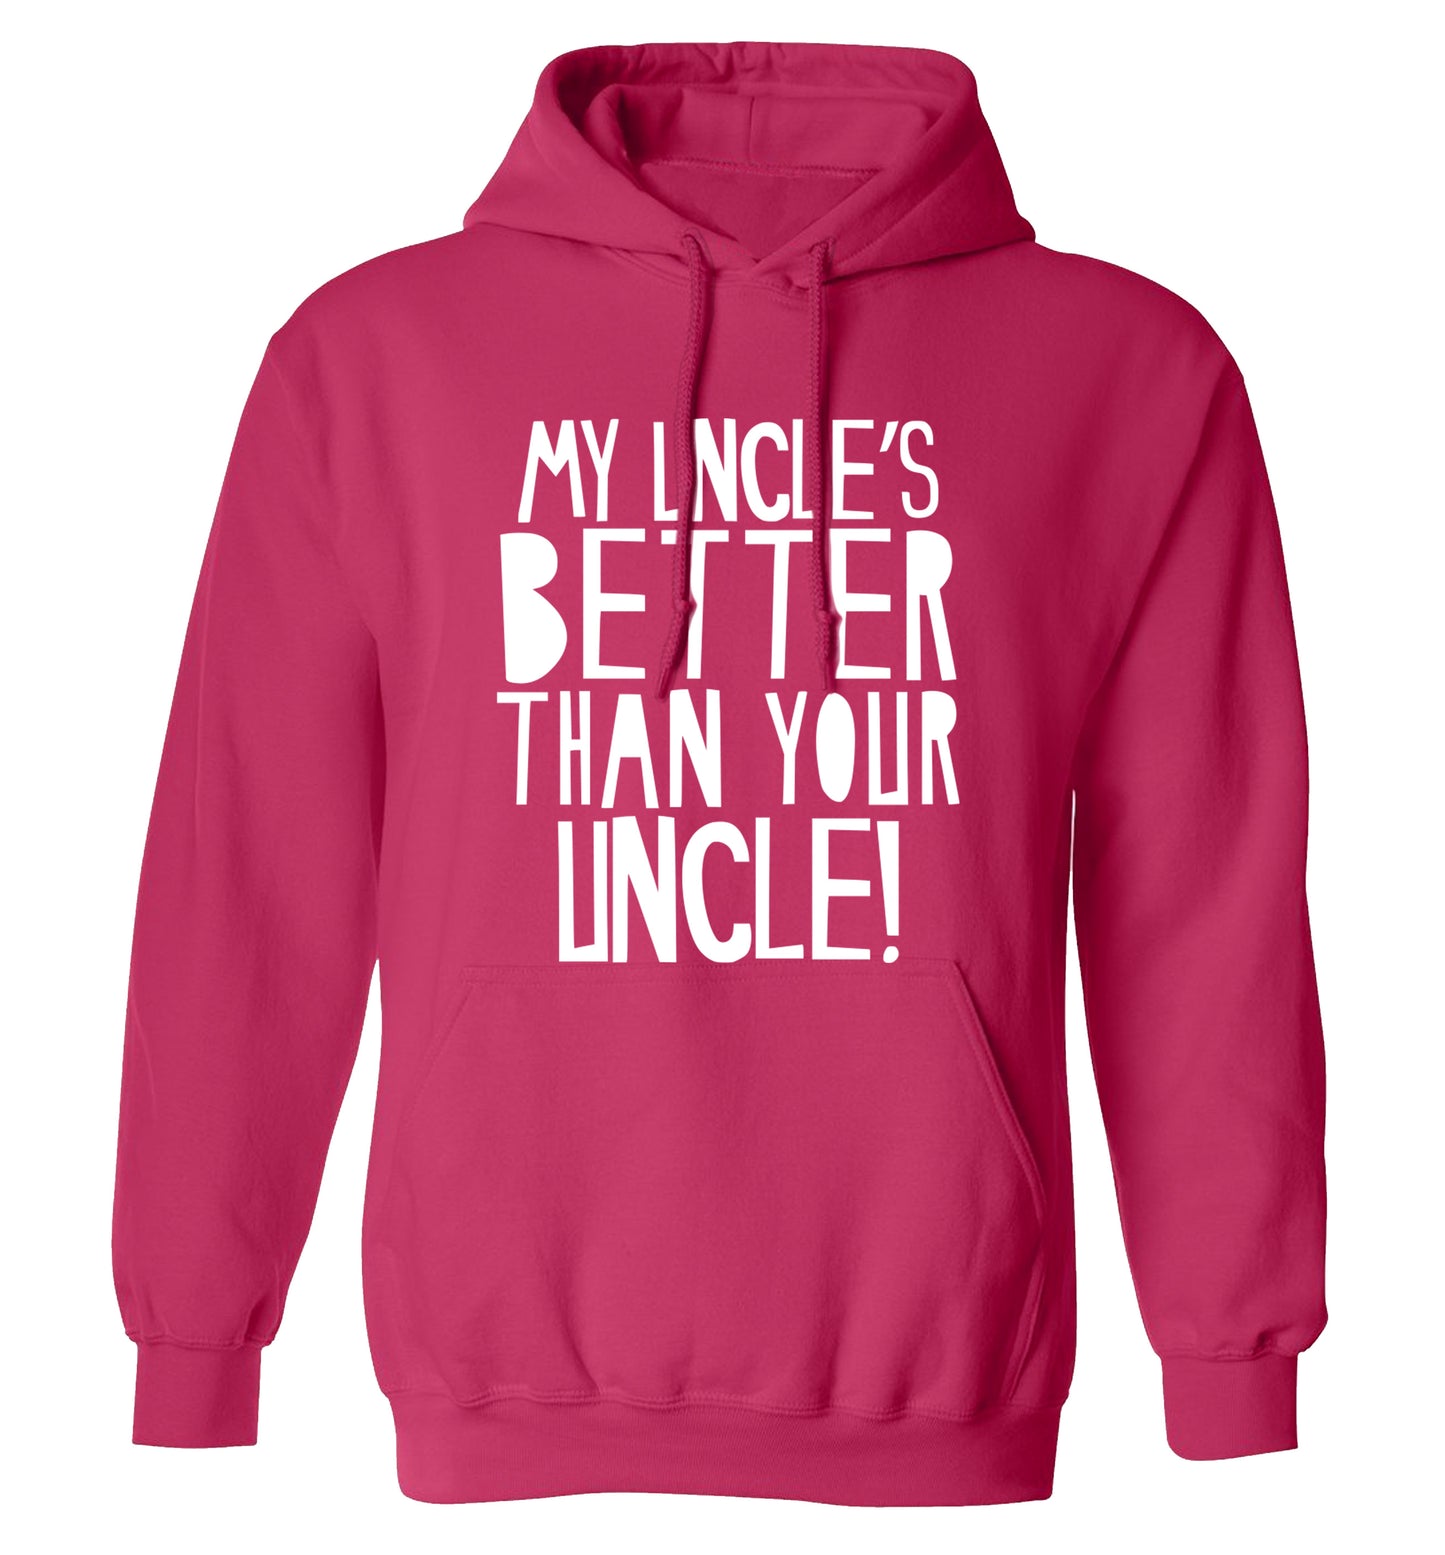 My uncles better than your uncle adults unisex pink hoodie 2XL